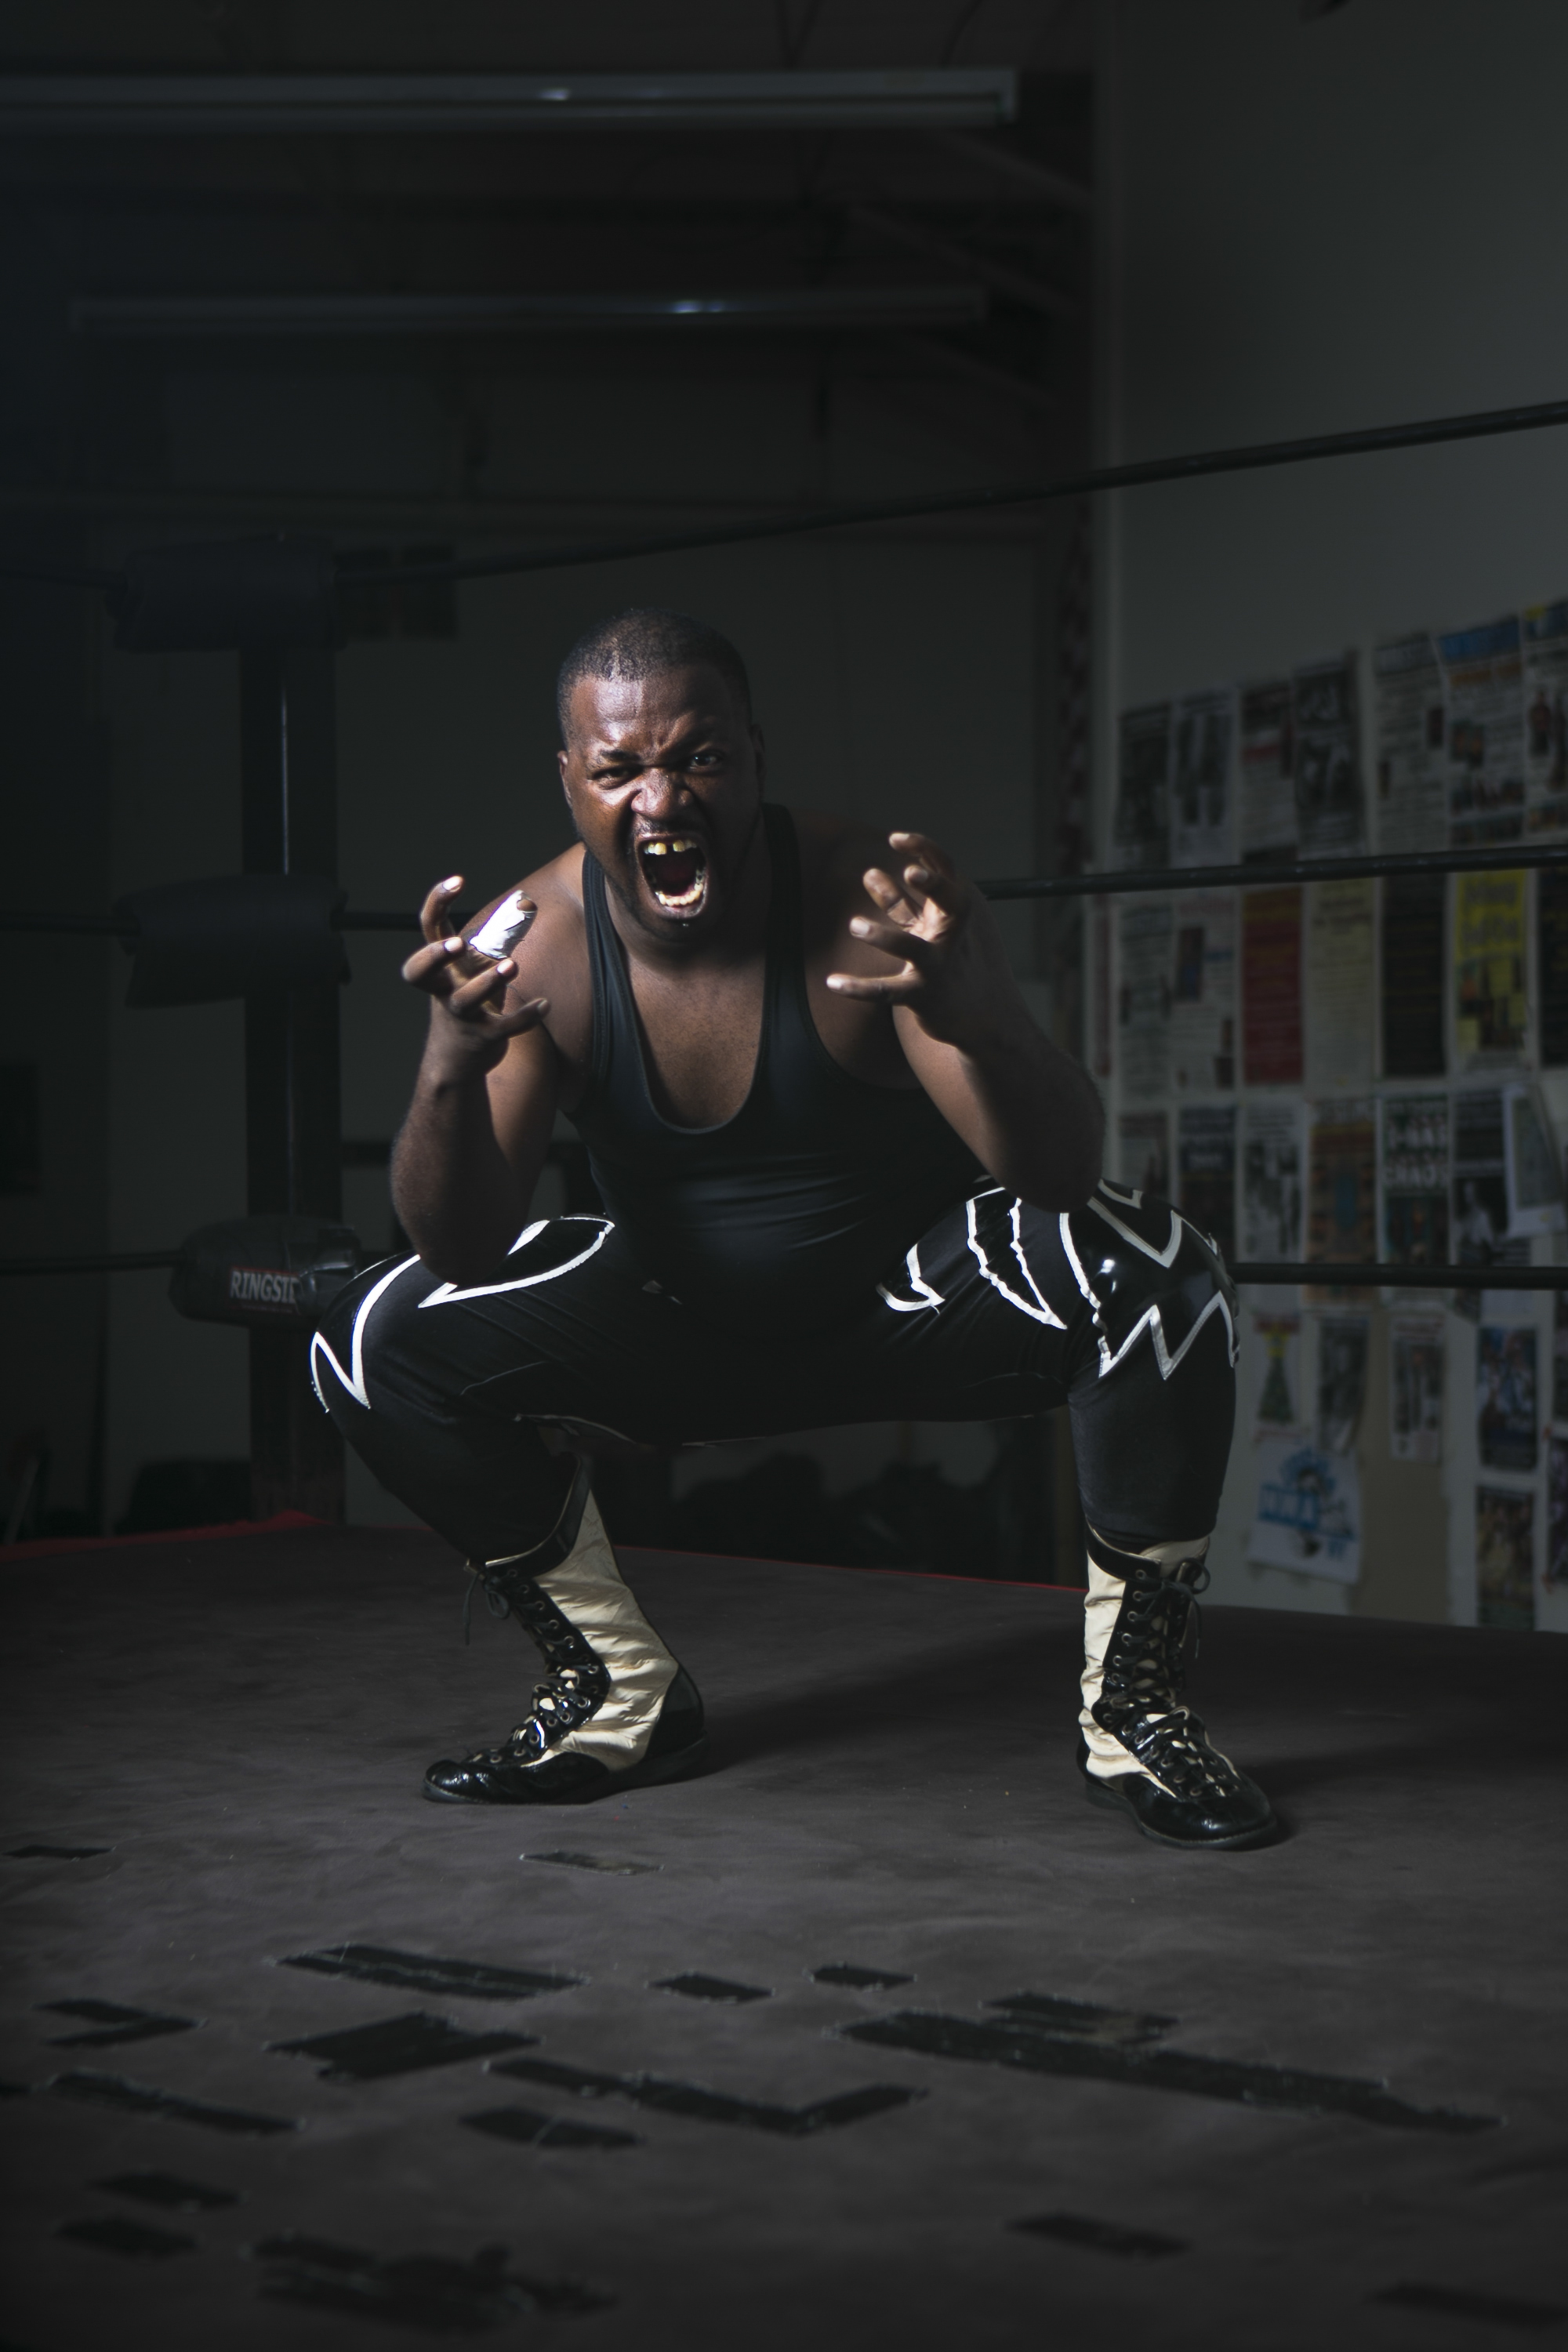 Professional Wrestler Gabreal Sant poses for portraits at their gym in Rochester, NY on Sunday, September 29, 2013. "It takes a little more from me every day." Photo by Maureen MacGregor 